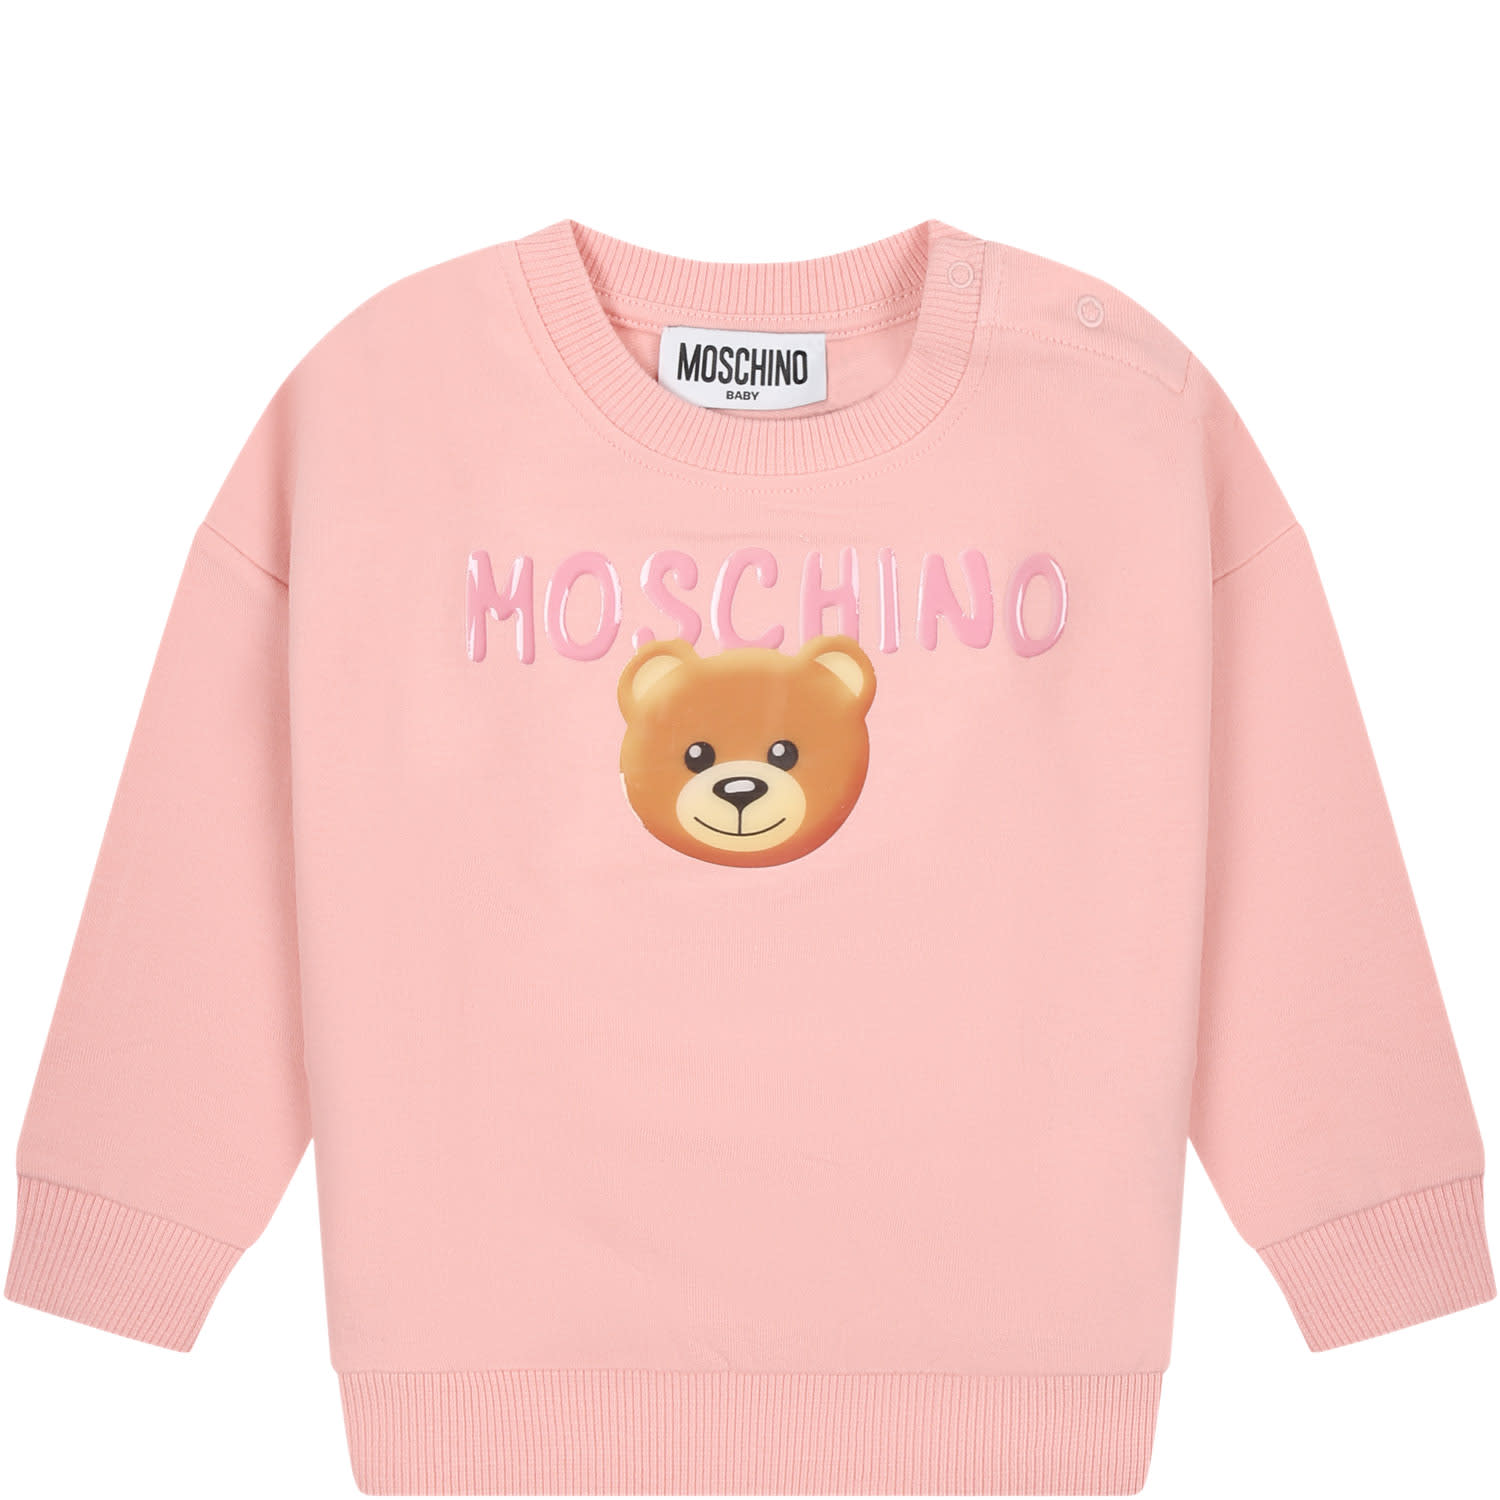 MOSCHINO PINK SWEATSHIRT FOR BABY GIRL WITH TEDDY BEAR AND LOGO